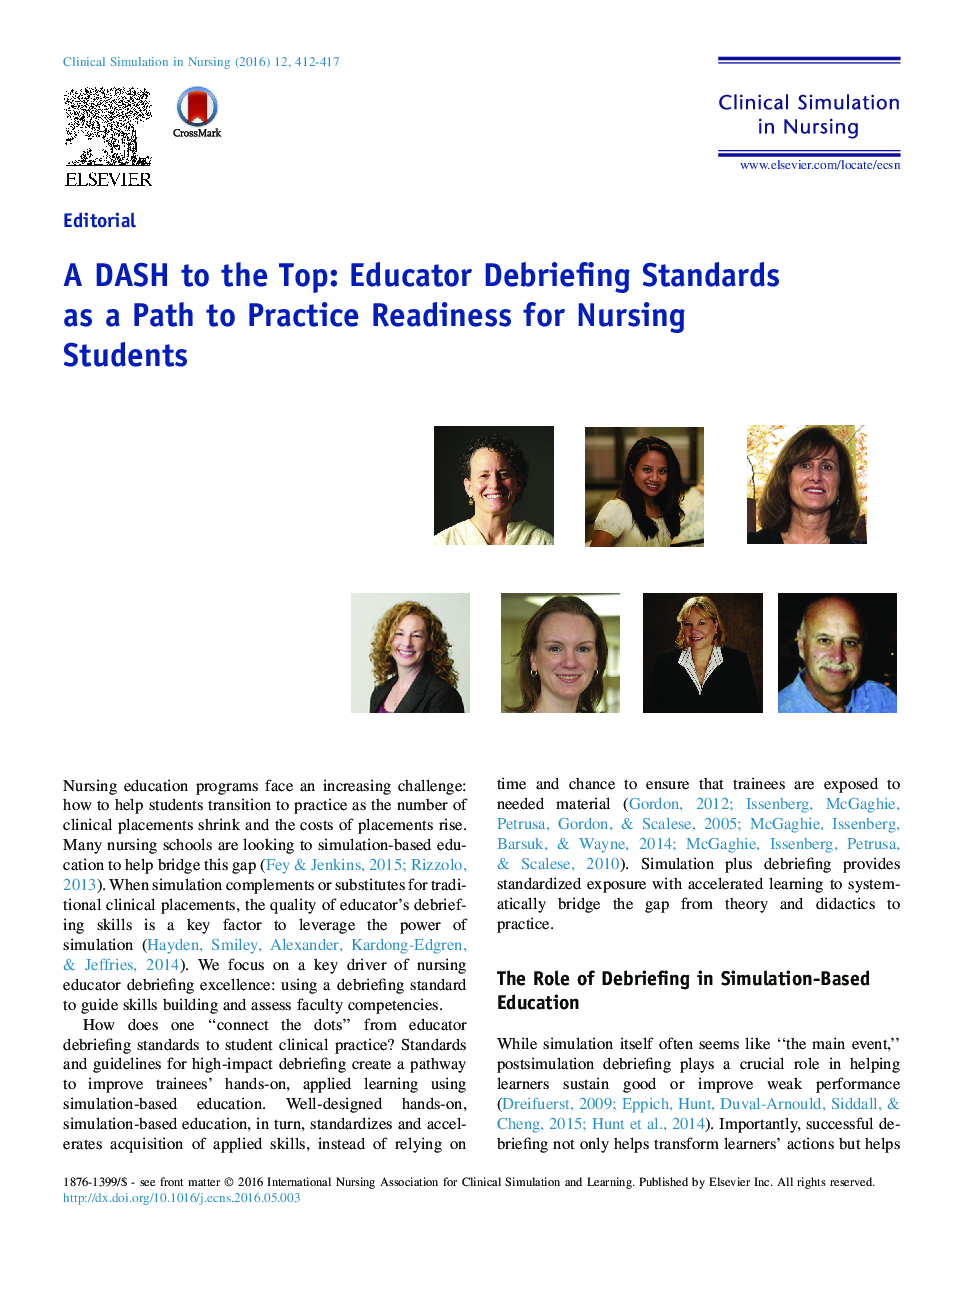 A DASH to the Top: Educator Debriefing Standards as a Path to Practice Readiness for Nursing Students